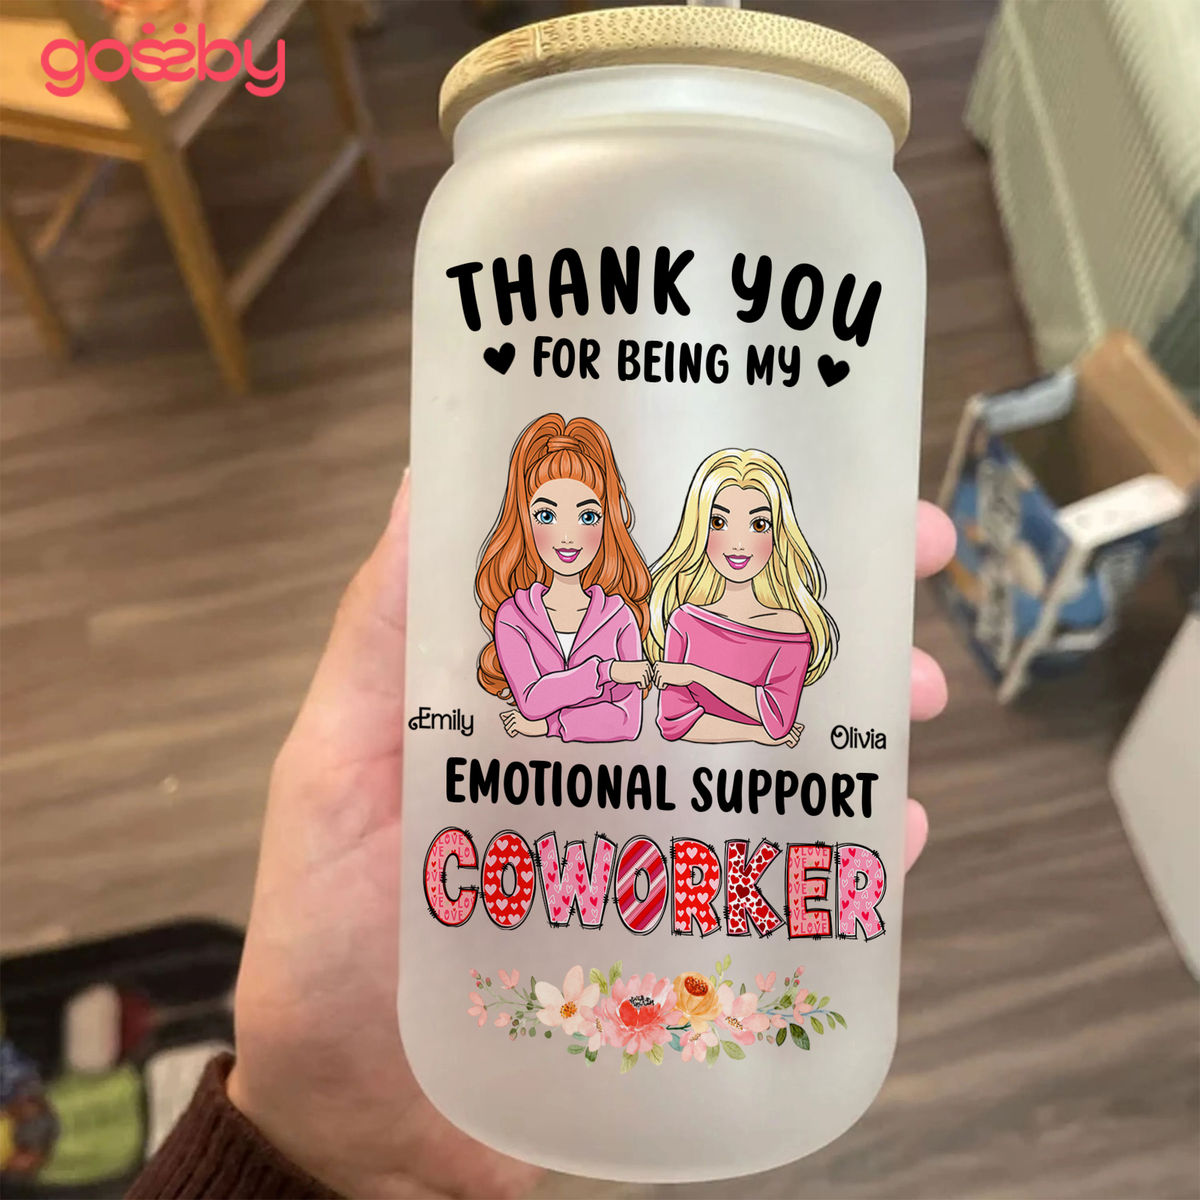 Personalized Tumbler - Glass tumbler - Thank you for being my emotional support coworker - Bestie Personalized Custom Glass tumbler - Gift For Best Friends, BFF, Sisters, Coworkers